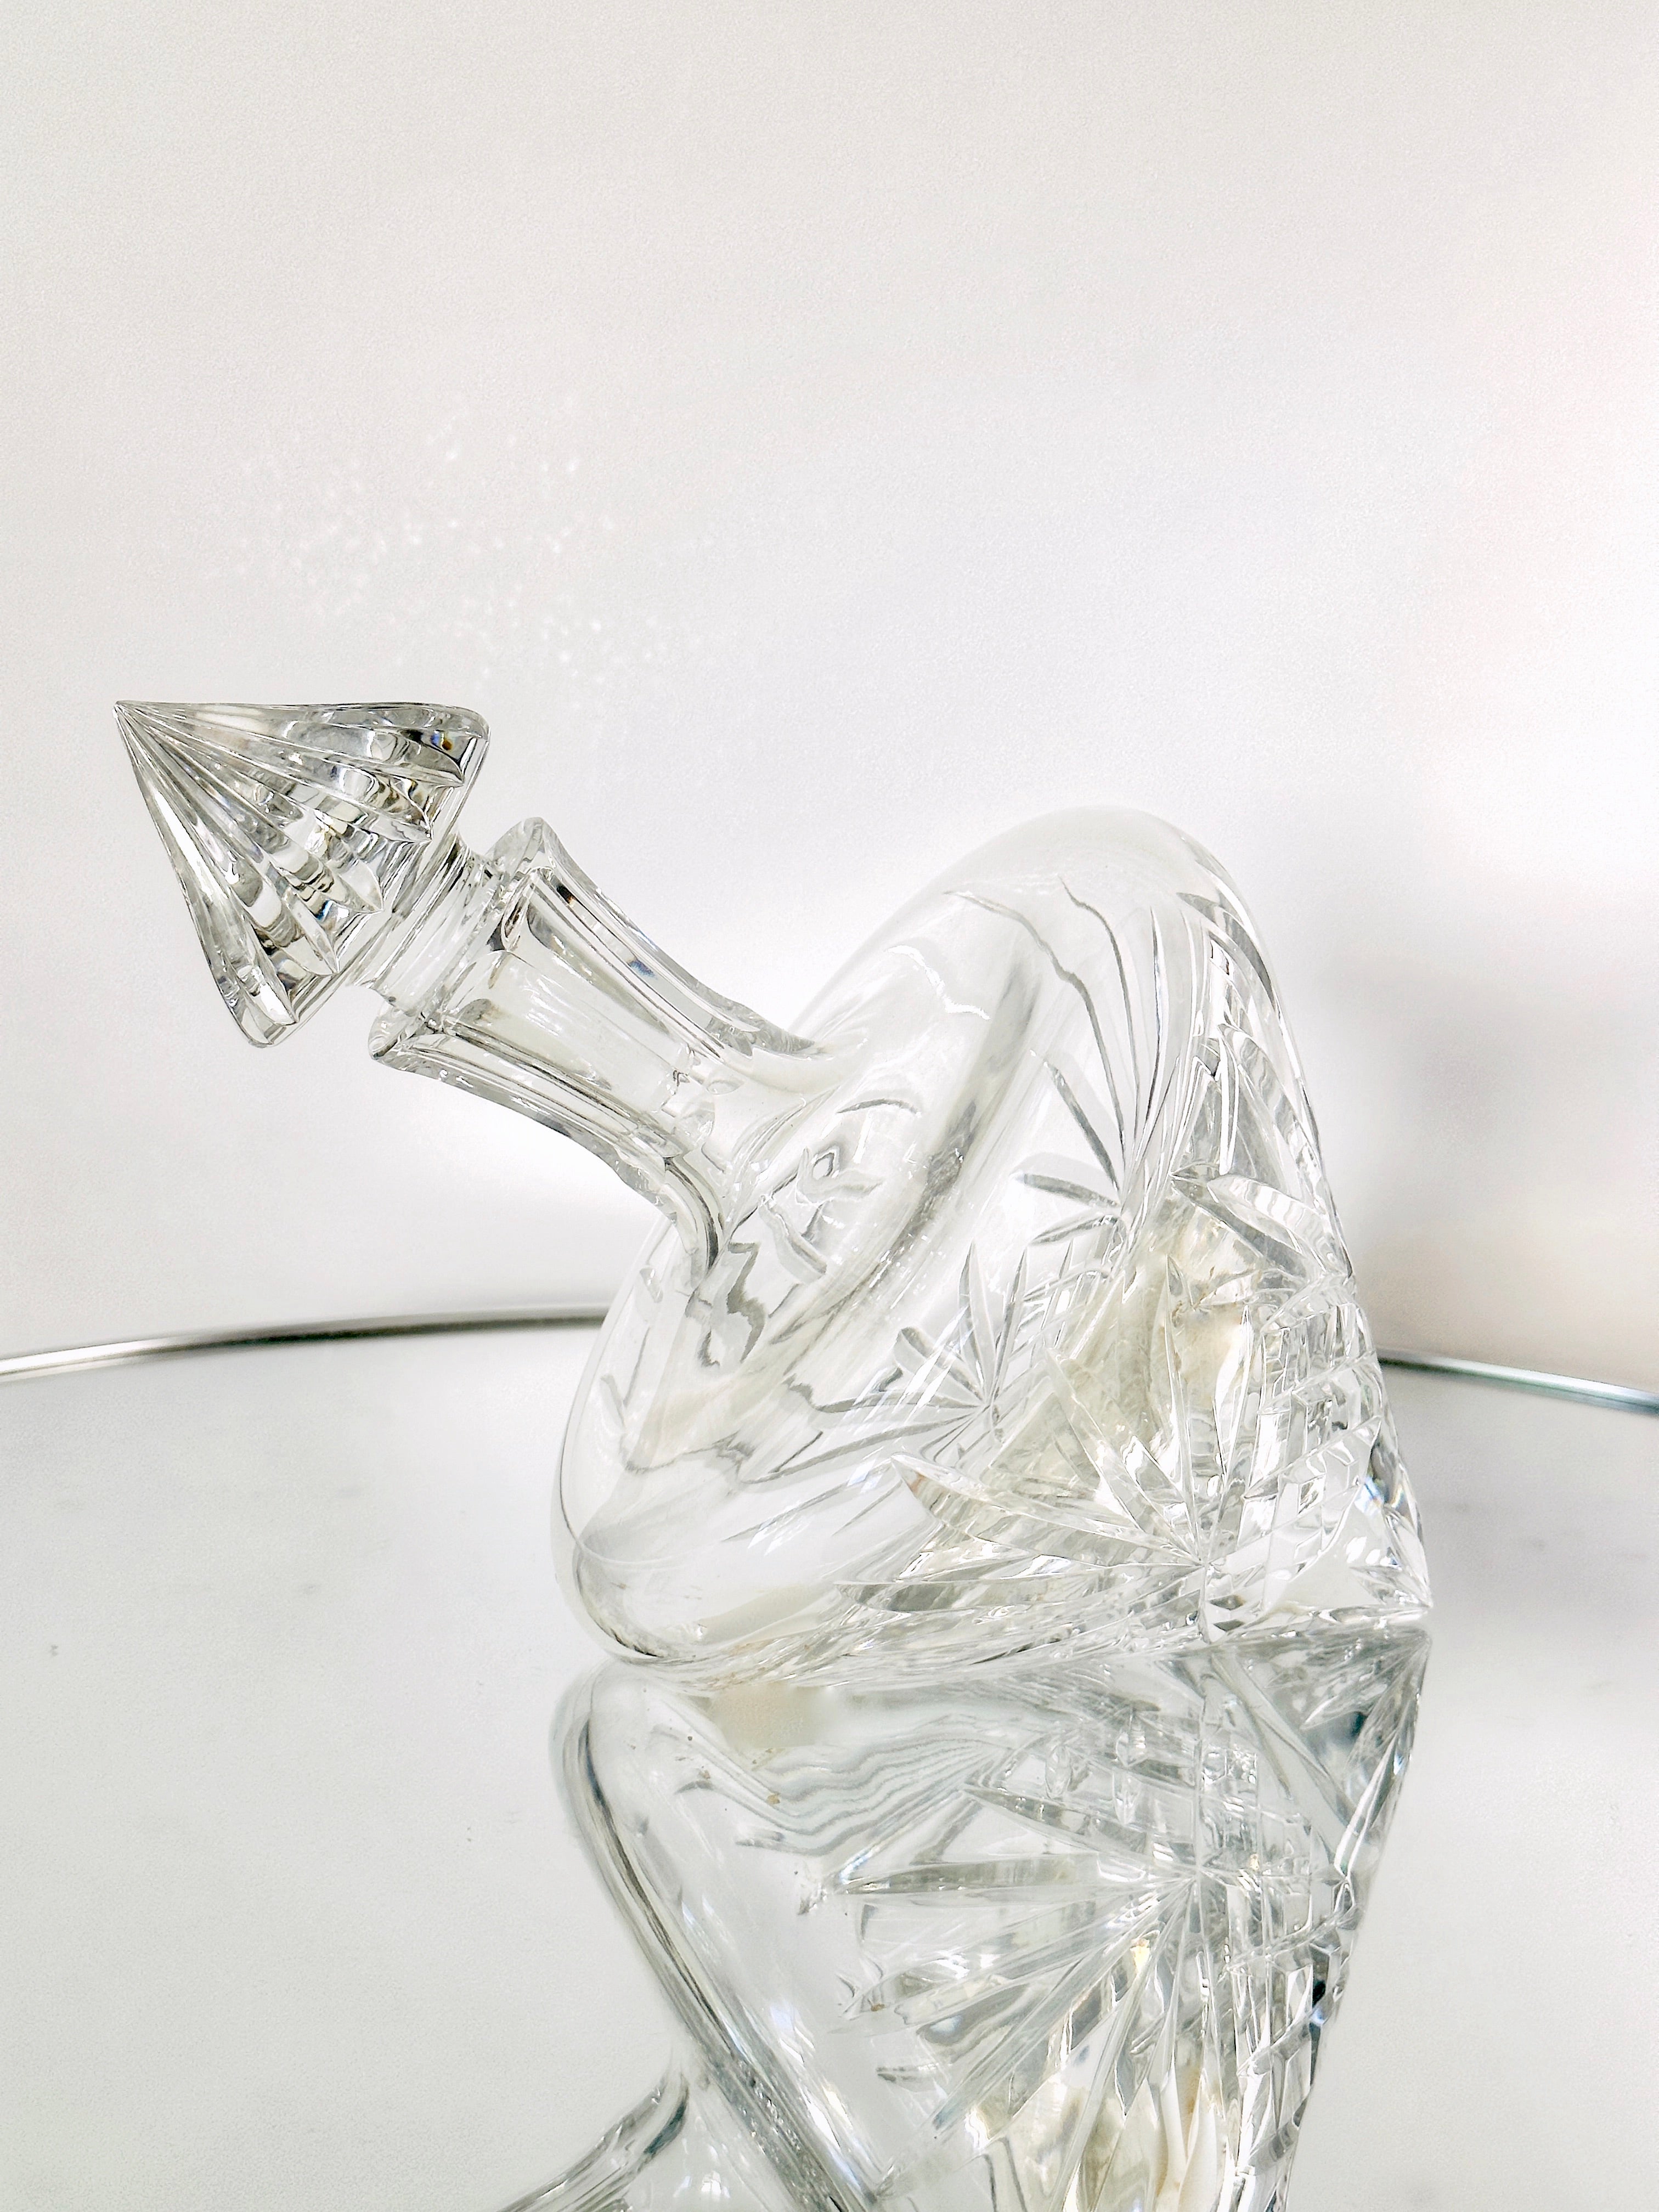 Vintage Waterford Crystal Leaning Decanter with Etched Designs, circa 1980 2